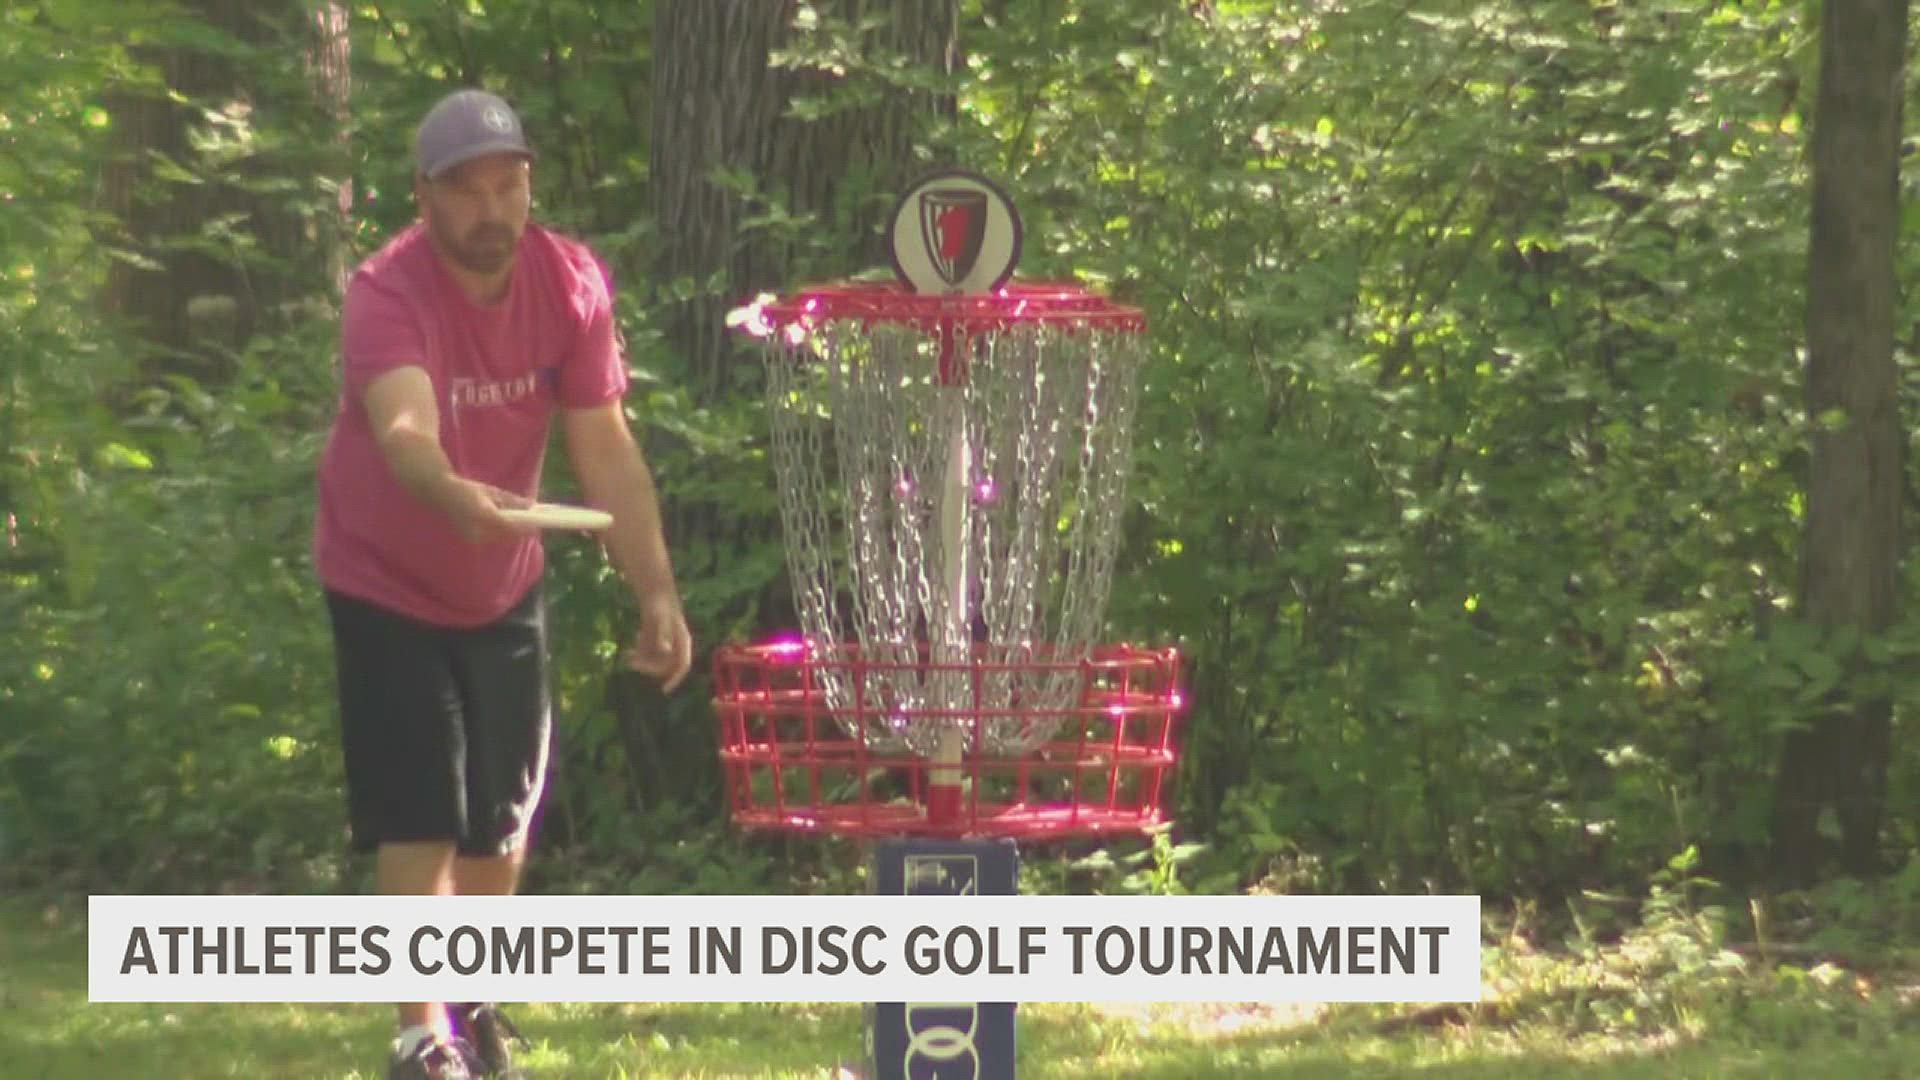 Disc golfers from across the country will compete at five of the Quad Cities' best courses.